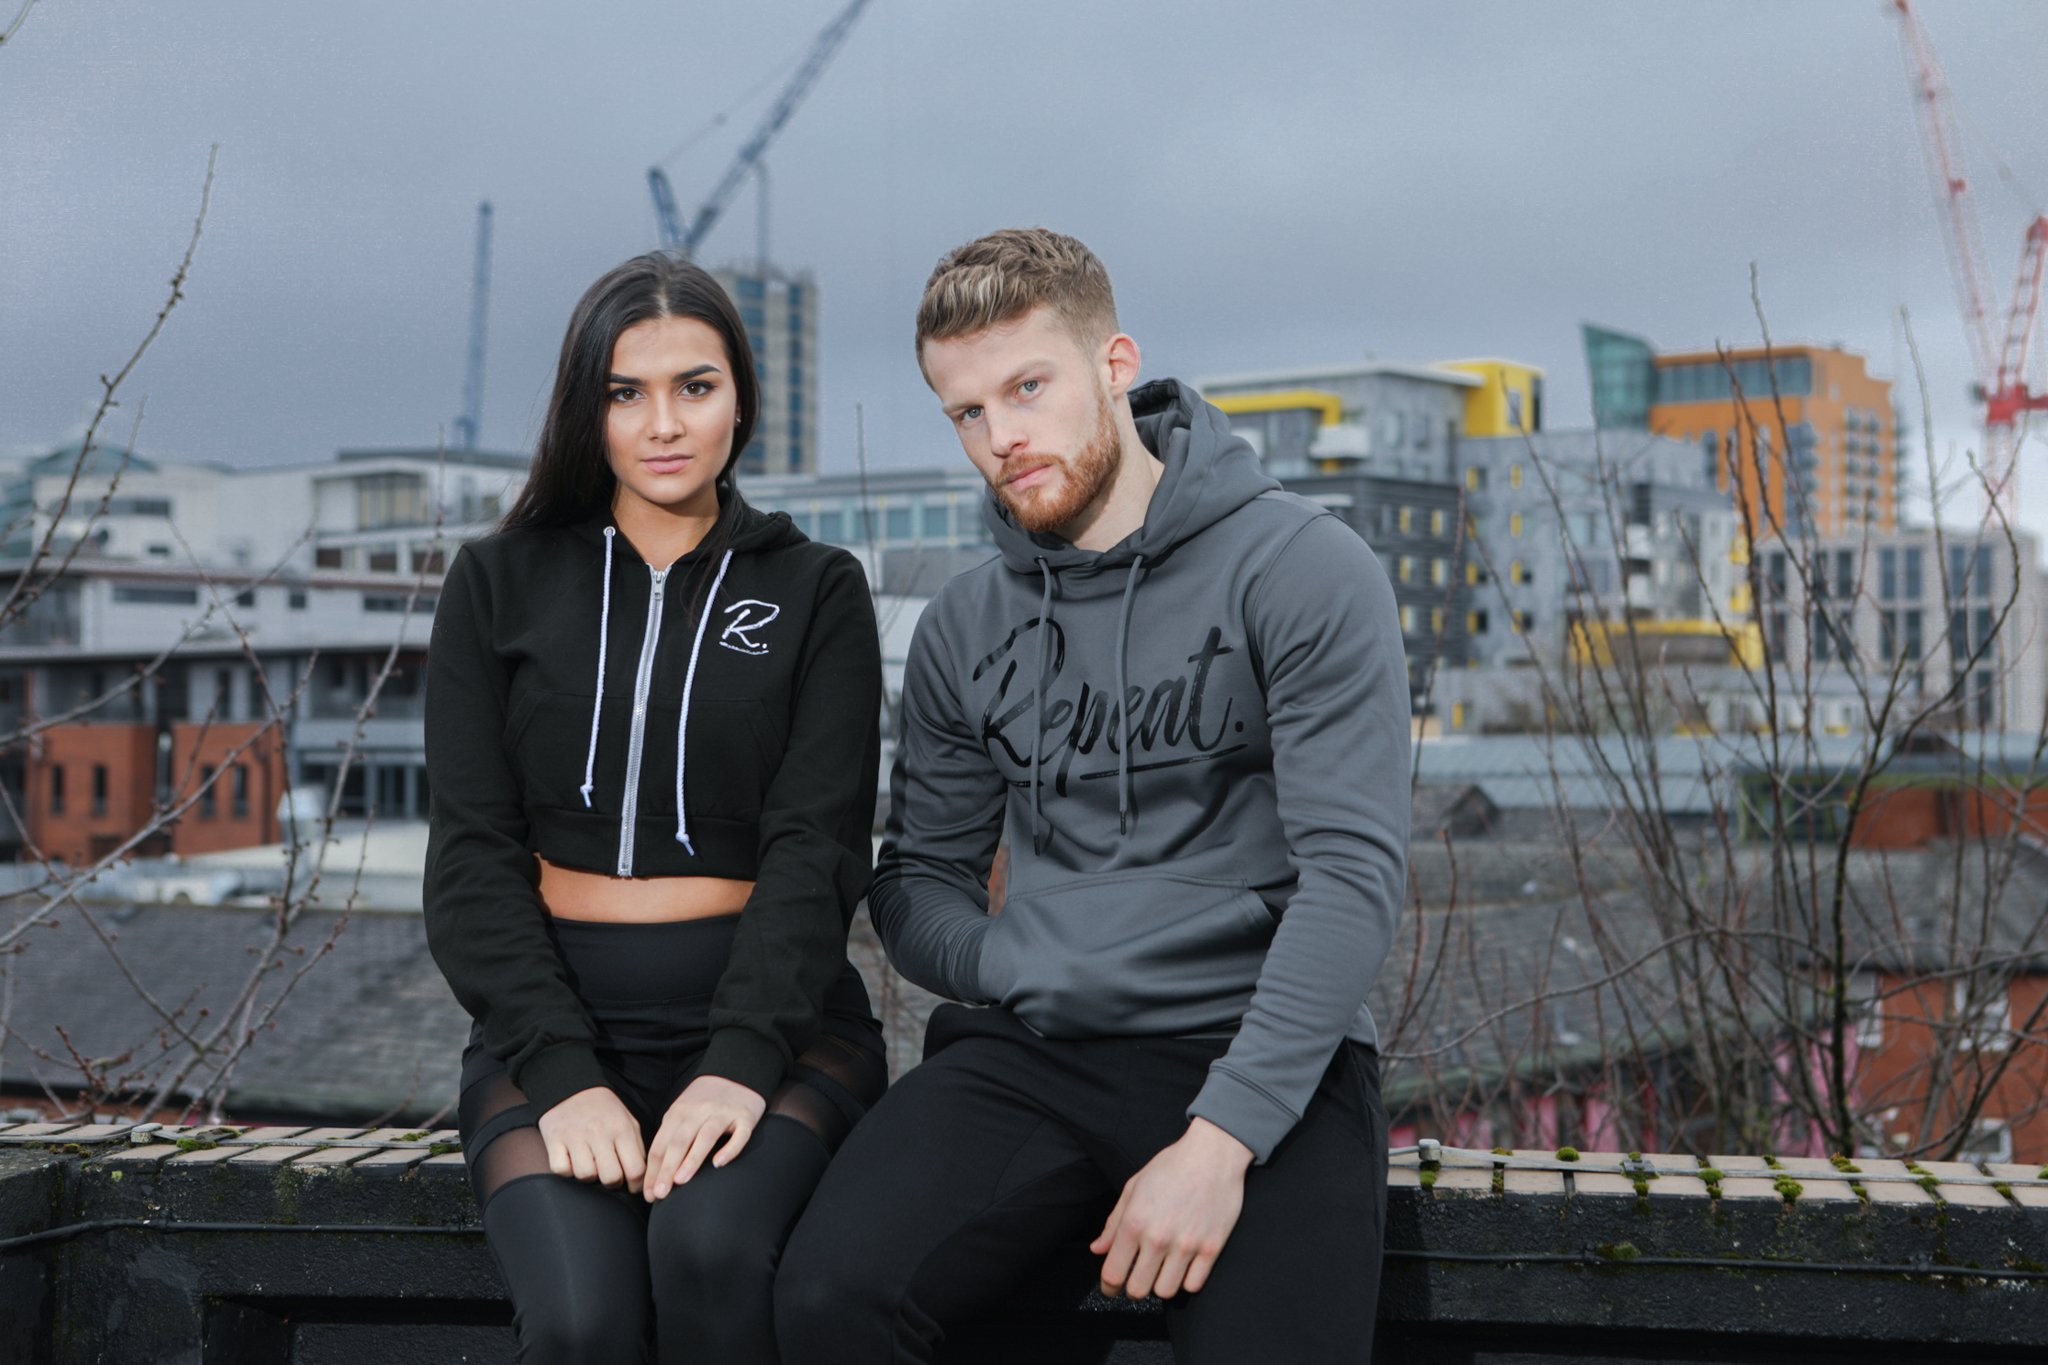 Model Campaign Lifestyle Photography Manchester | Manchester Photography Studio